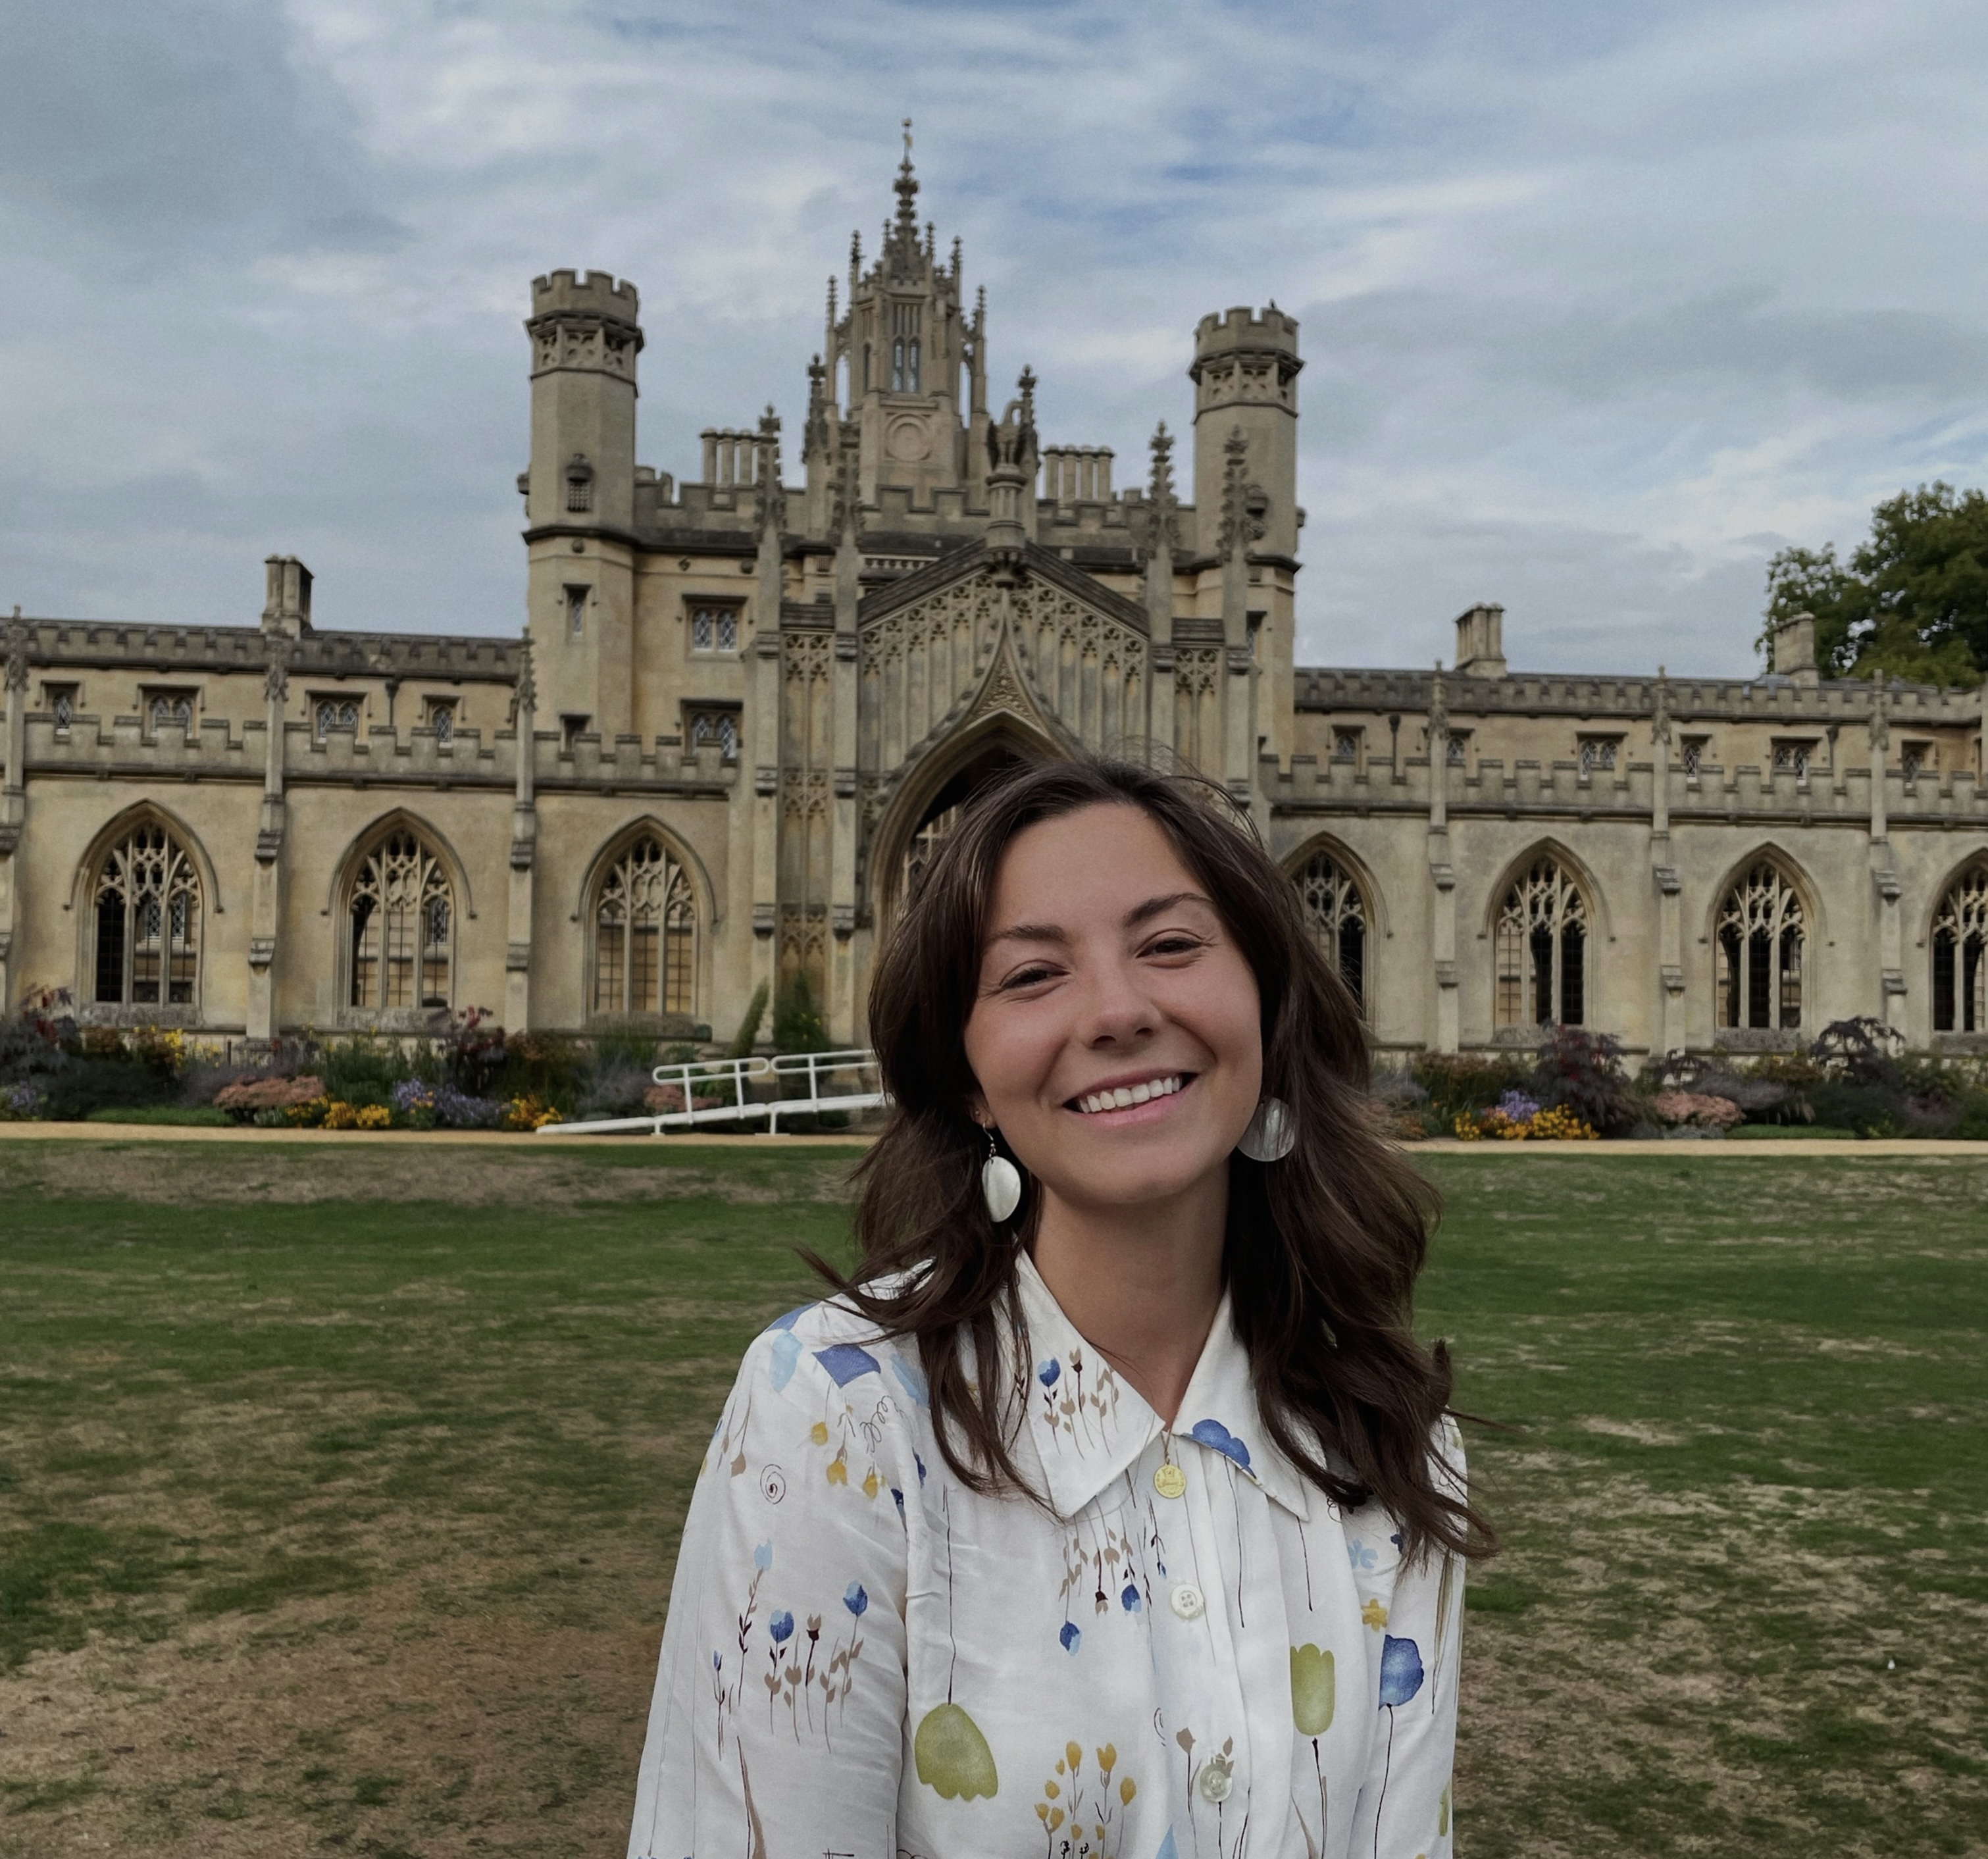 Picture of Eleonora smiling in front of St Johns College